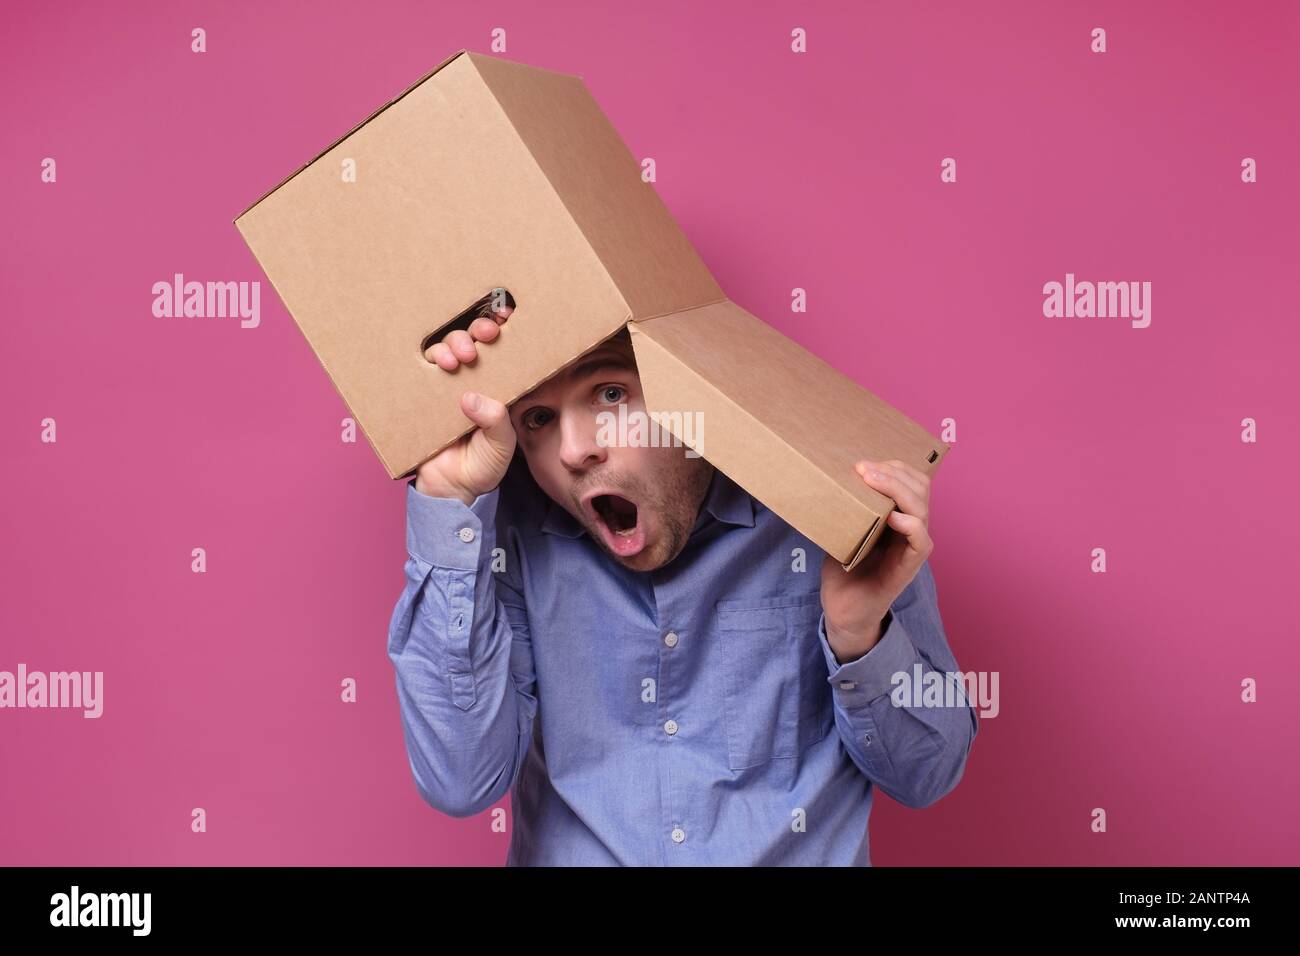 Man in blue shirt with a brown paper box on his head, hiding from job stress. Studio shot Stock Photo